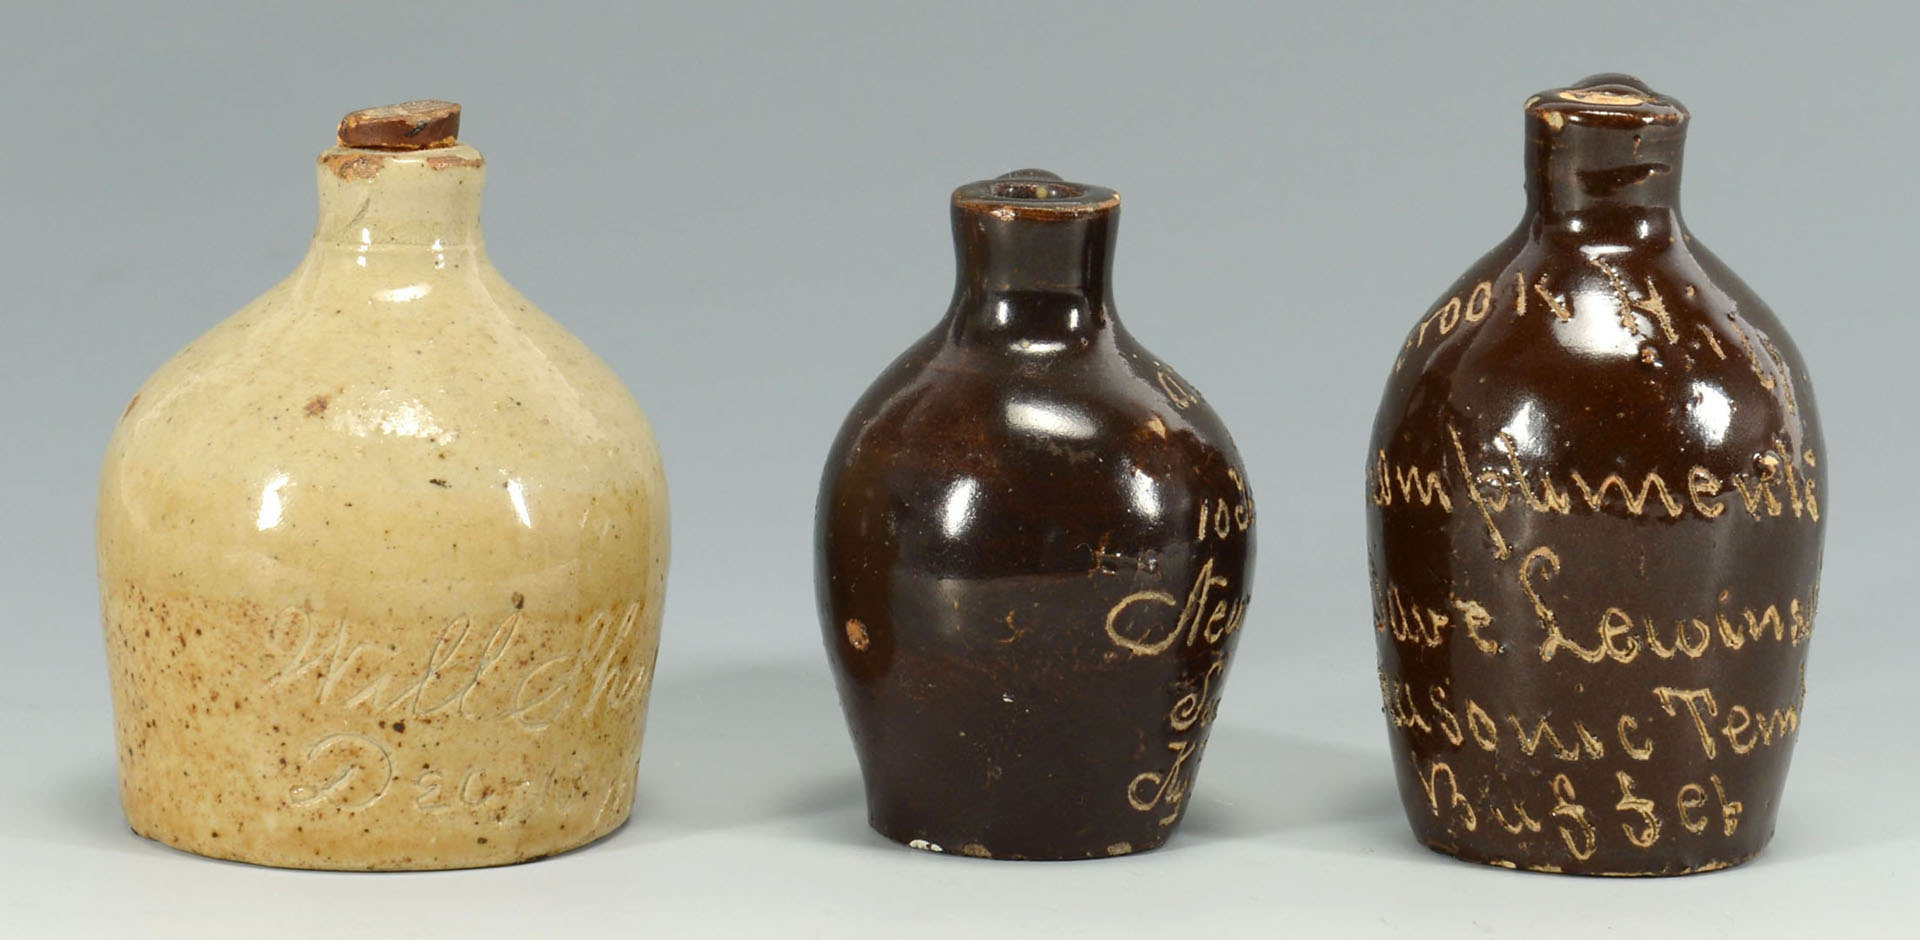 Lot 552: 3 Miniature Jugs, Incised Script, One KY Whiskey